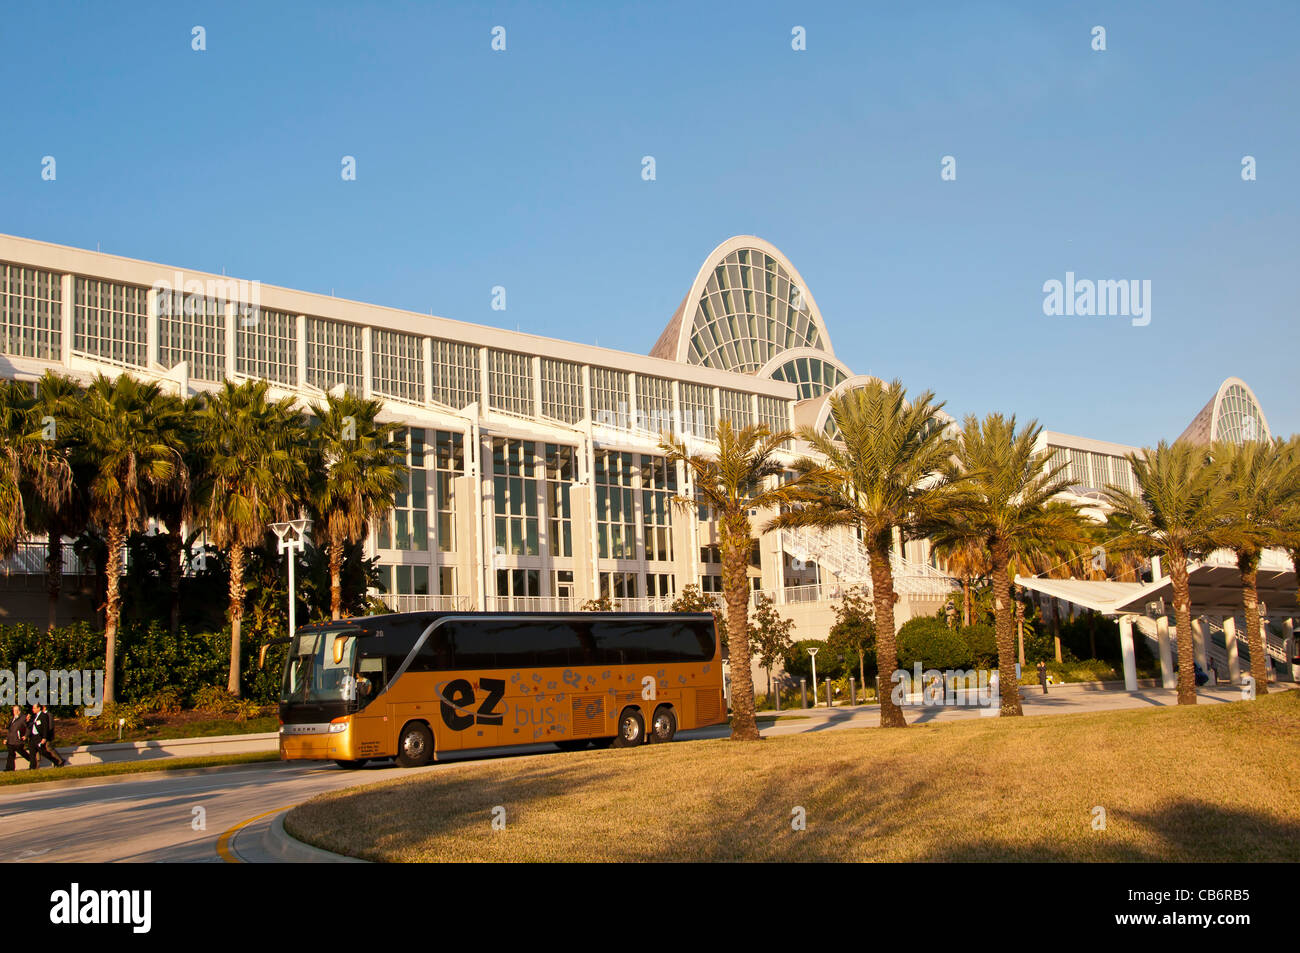 Orlando, Florida, Orange County Convention Center in the International Drive or I-Drive area Stock Photo